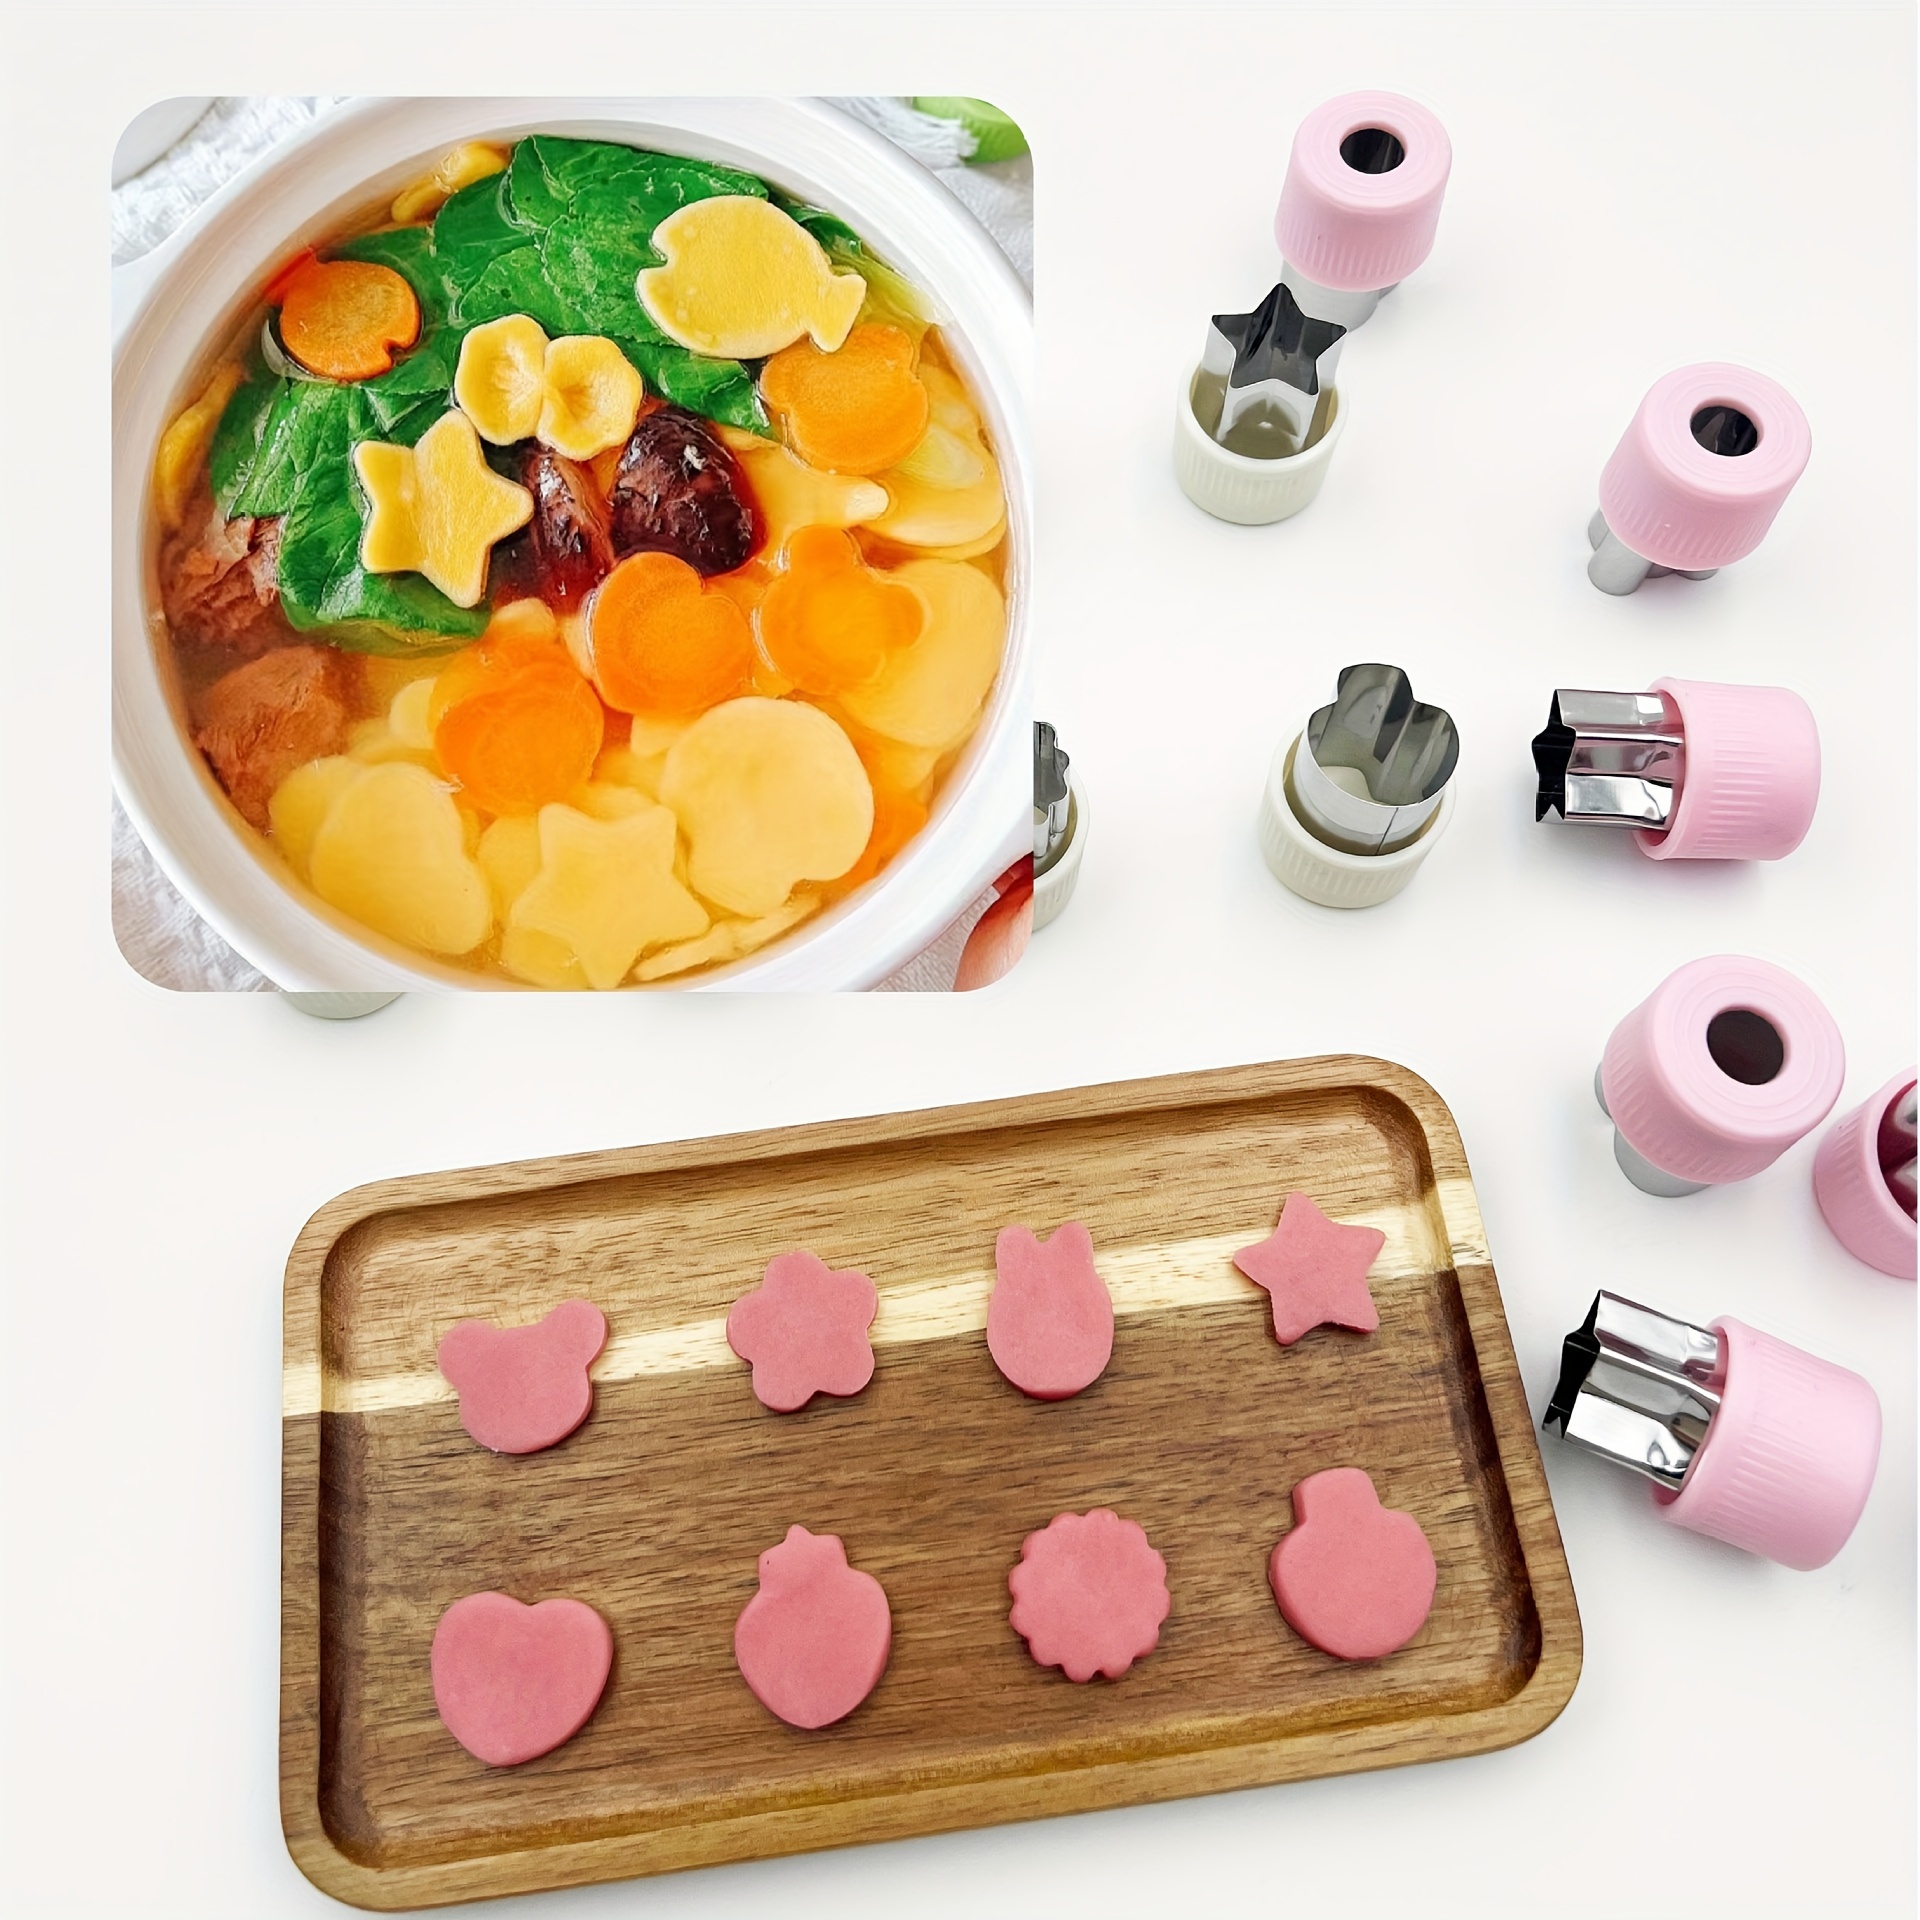 

8pcs, Fruit & Butterfly Pasta Stamp Mold Set, Stainless Steel Dough Cutters, Cookie Press Shapes Kitchen Gadgets Kit With Comfort Grip Handles